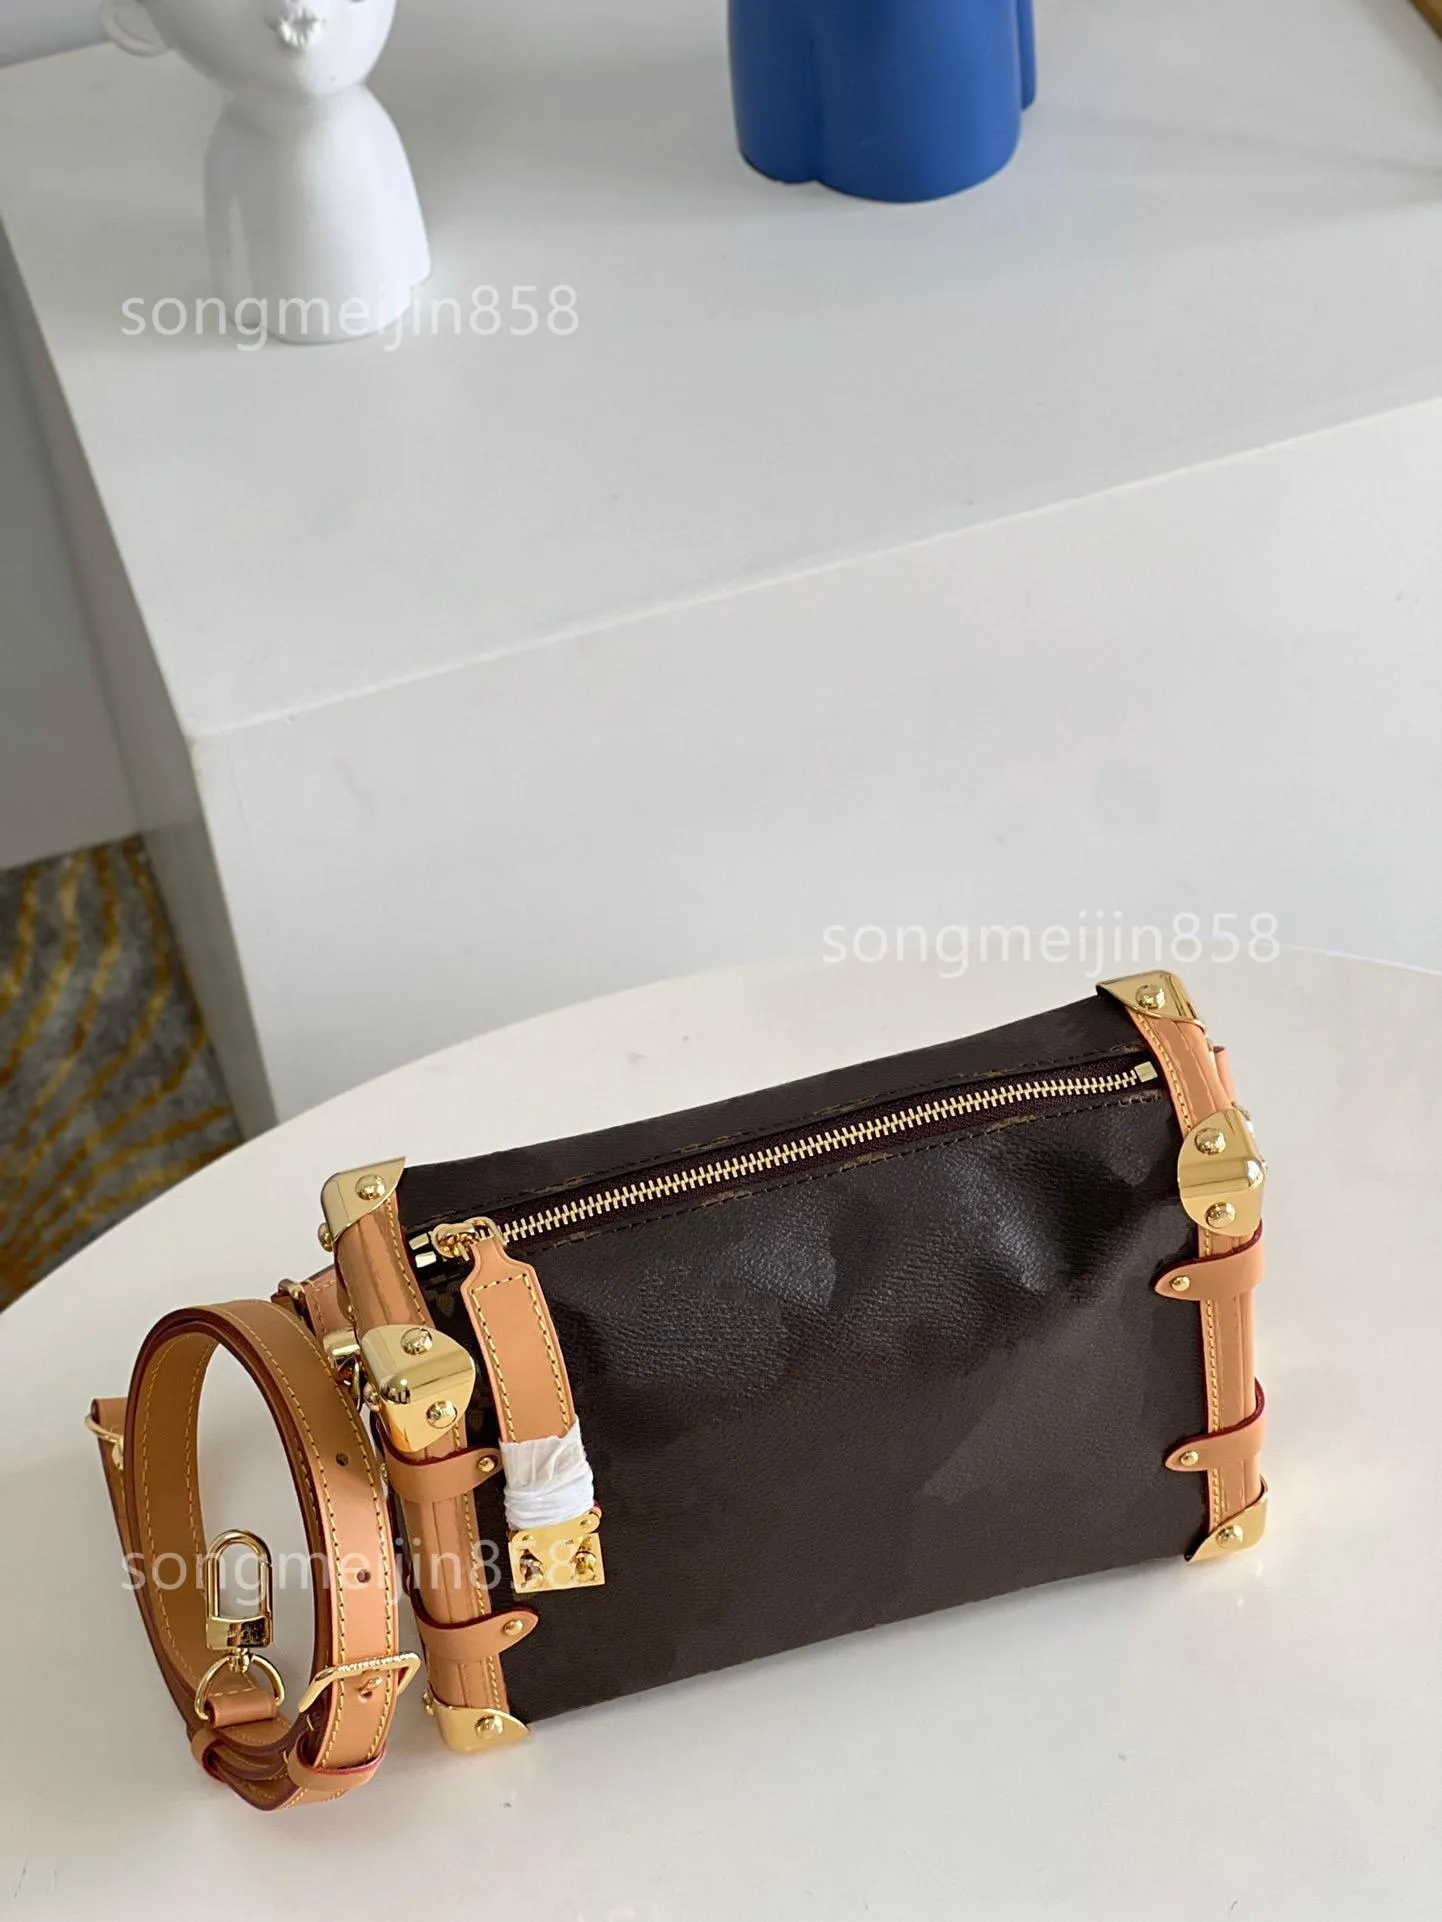 2022 Ny ankomstdesignväska Sidstam PM Old Flower Box For Women M46358 Leather Crossbody Package Tote Messenger Bags288d